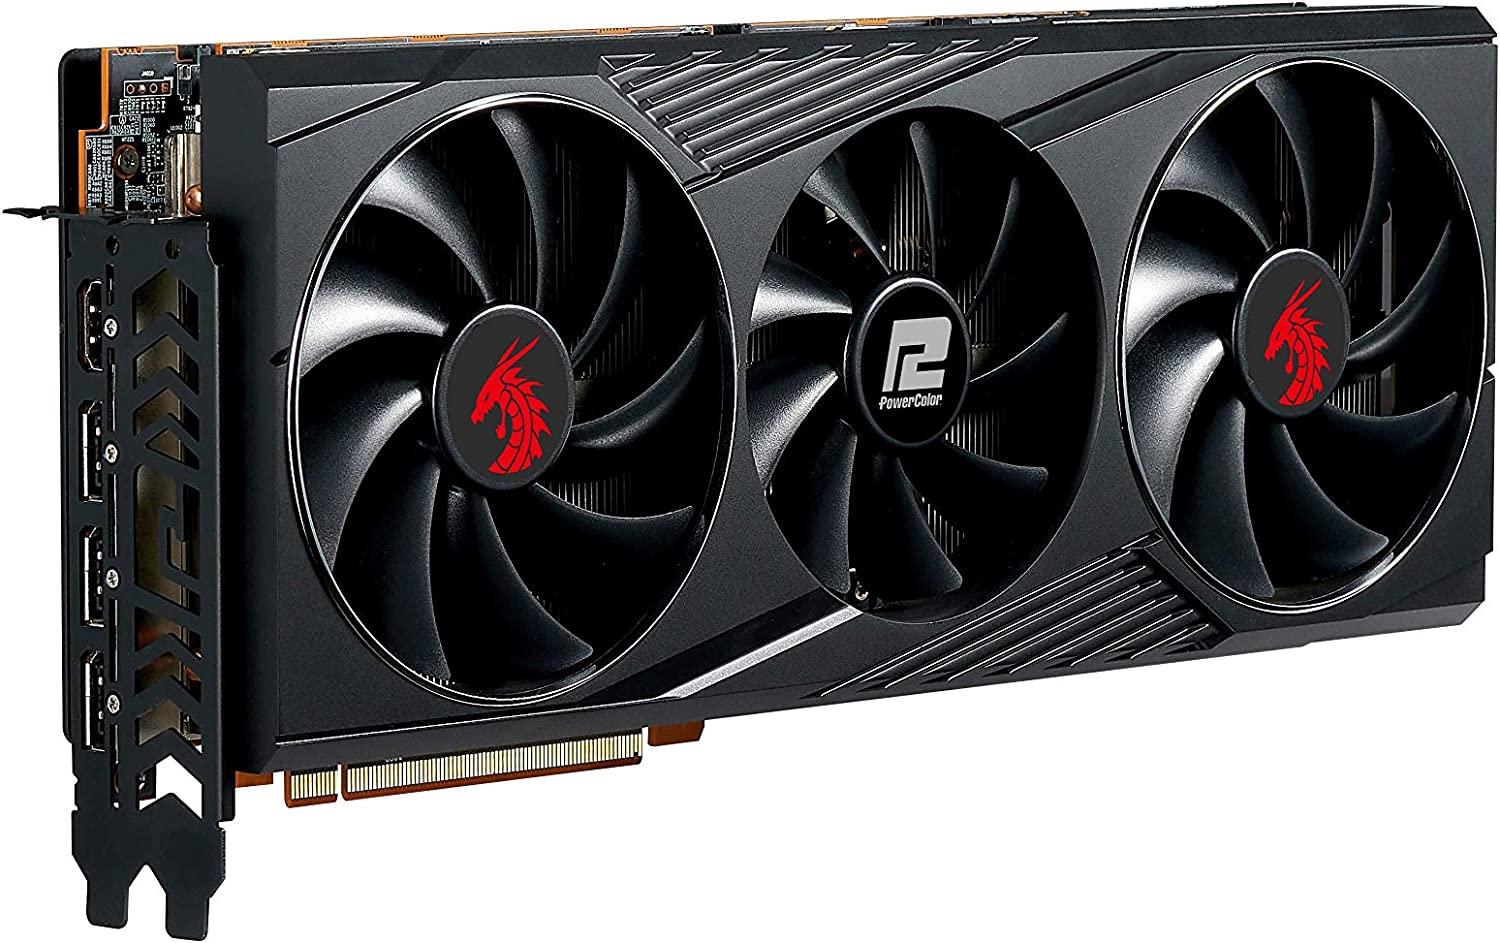 PowerColor Red Dragon AMD Radeon RX 6800 16GB GDDR6 Graphics Card for $579.99